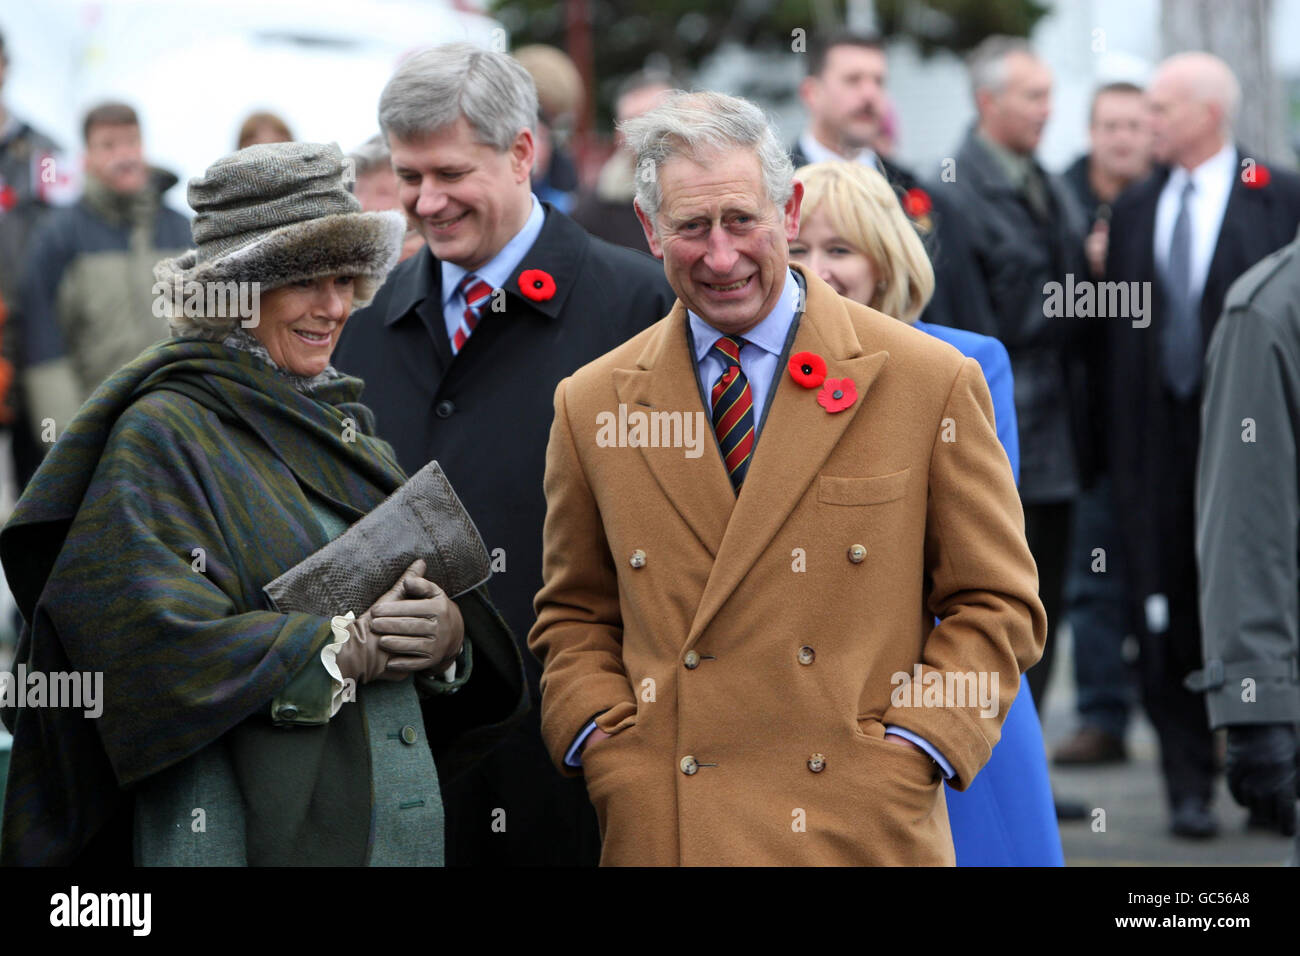 The Prince of Wales and the Duchess of Cornwall meet Prime Minister Stephen Harper (behind) during a visit to the Cupids Cove Plantation Archaeological site as part of their visit to Canada. Stock Photo